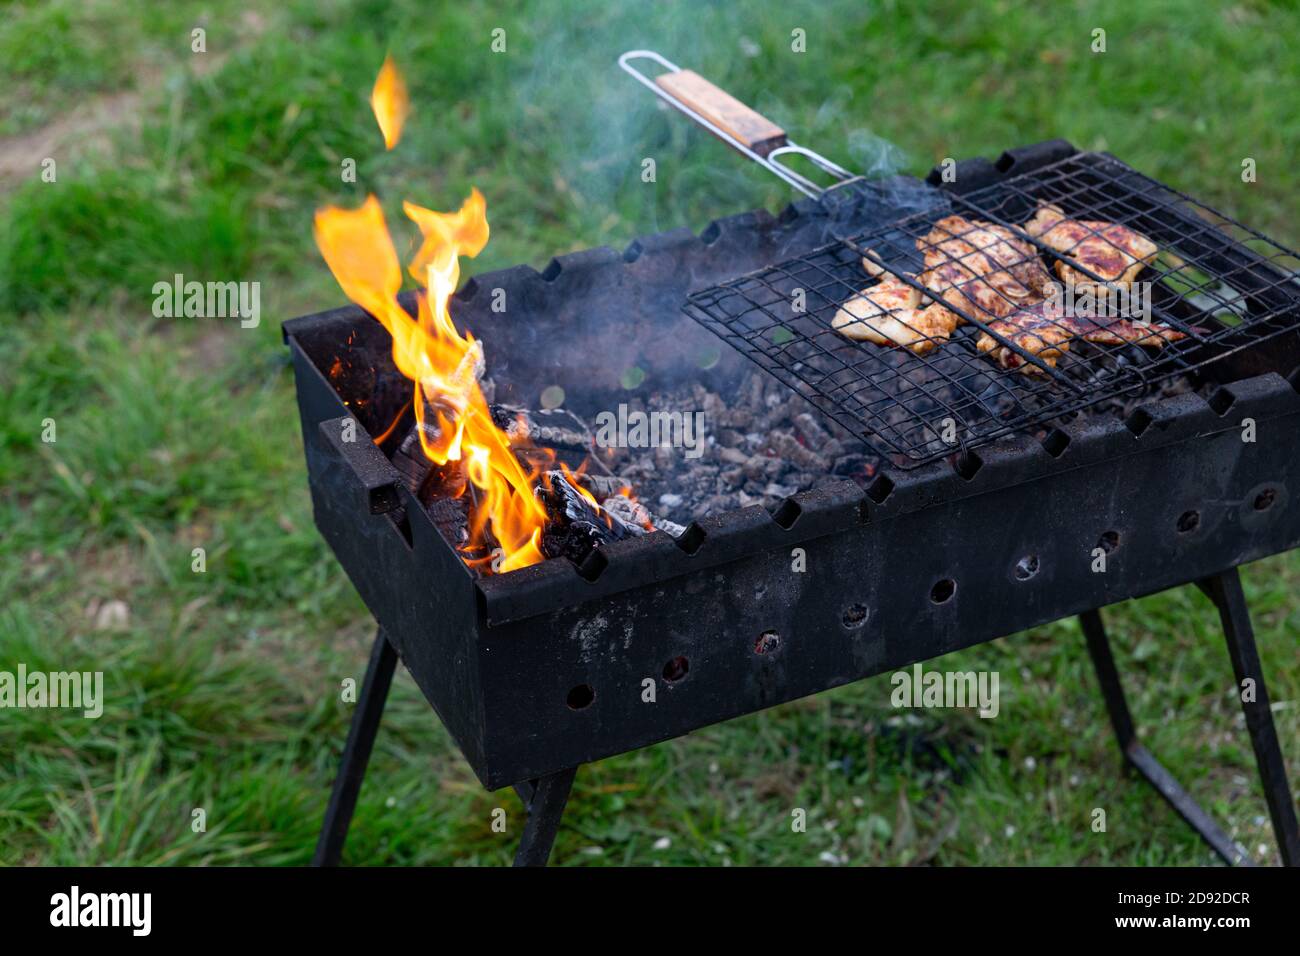 Meat is grilled on charcoal grill. Coals smolder in a brazier with smoke focus on fire. Outdoor cooking. Meeting with friends, picnic, weekend. Evenin Stock Photo